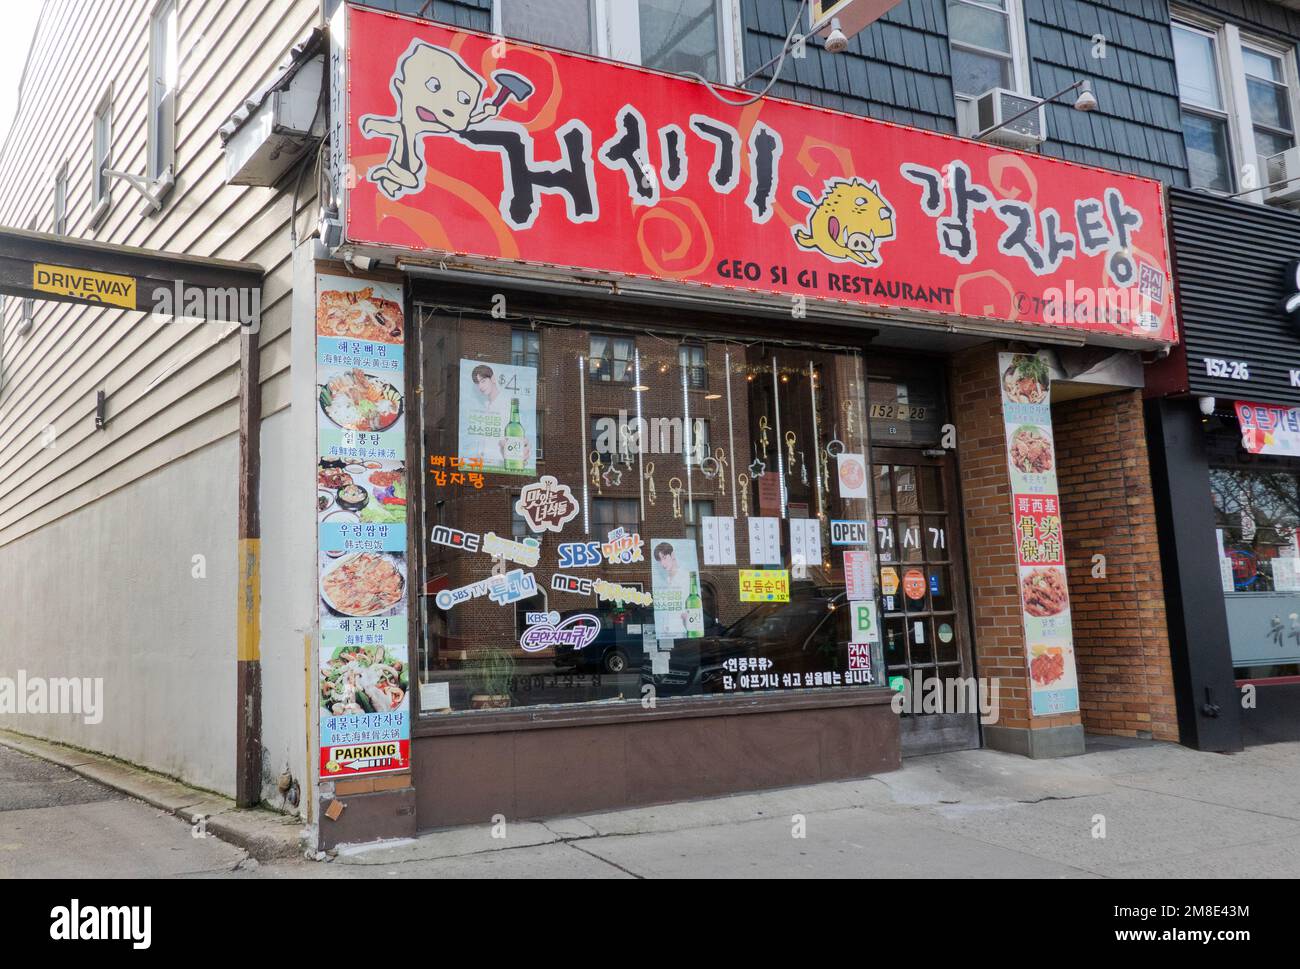 The exterior of Geo Si Gi, a Korean restaurant on Northern Boulevard in Flushing, Queens, New York City. Stock Photo